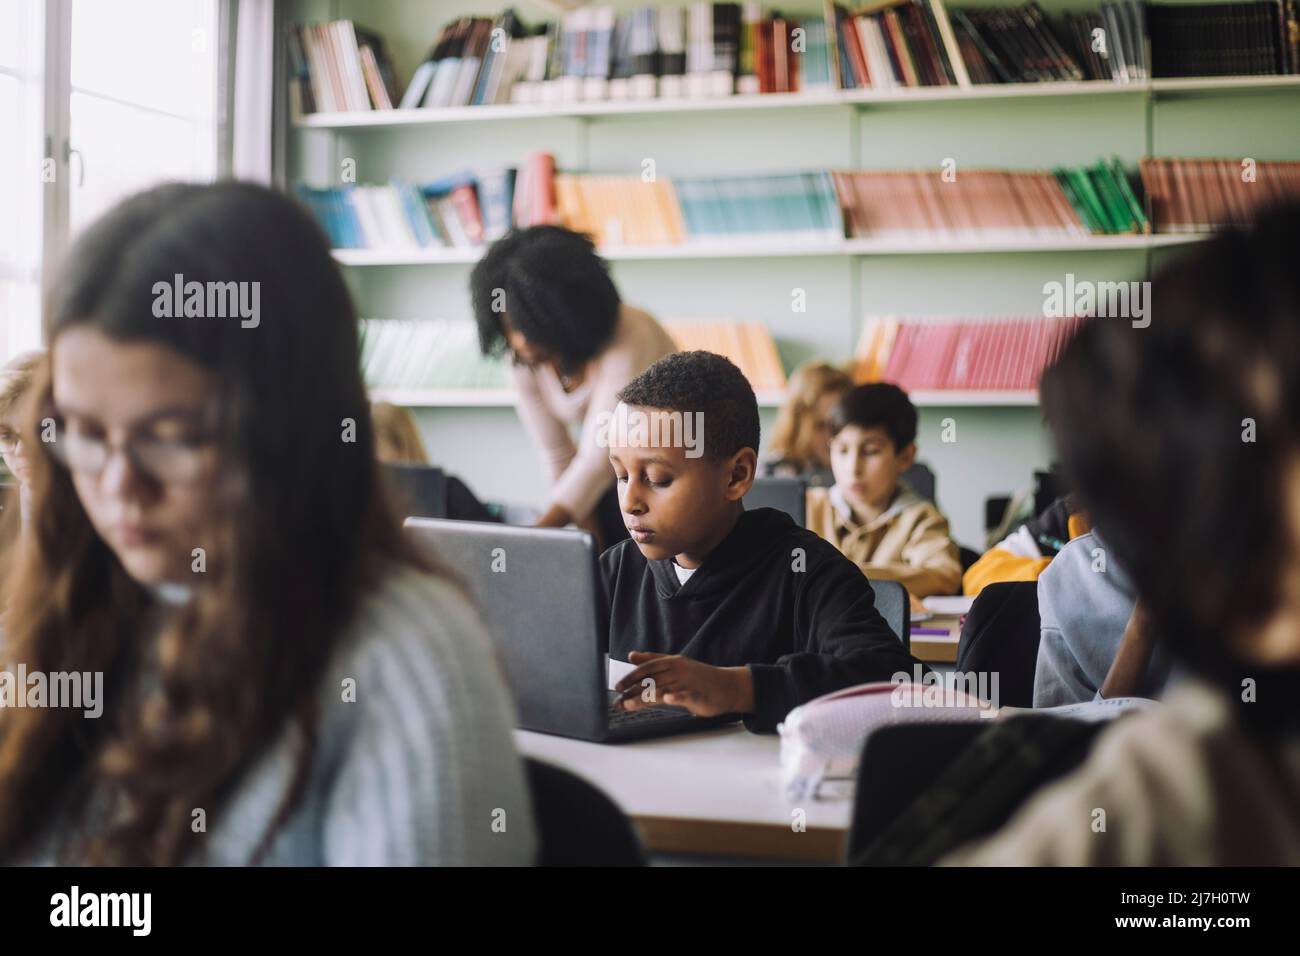 Boy using laptop while e-learning in classroom Stock Photo